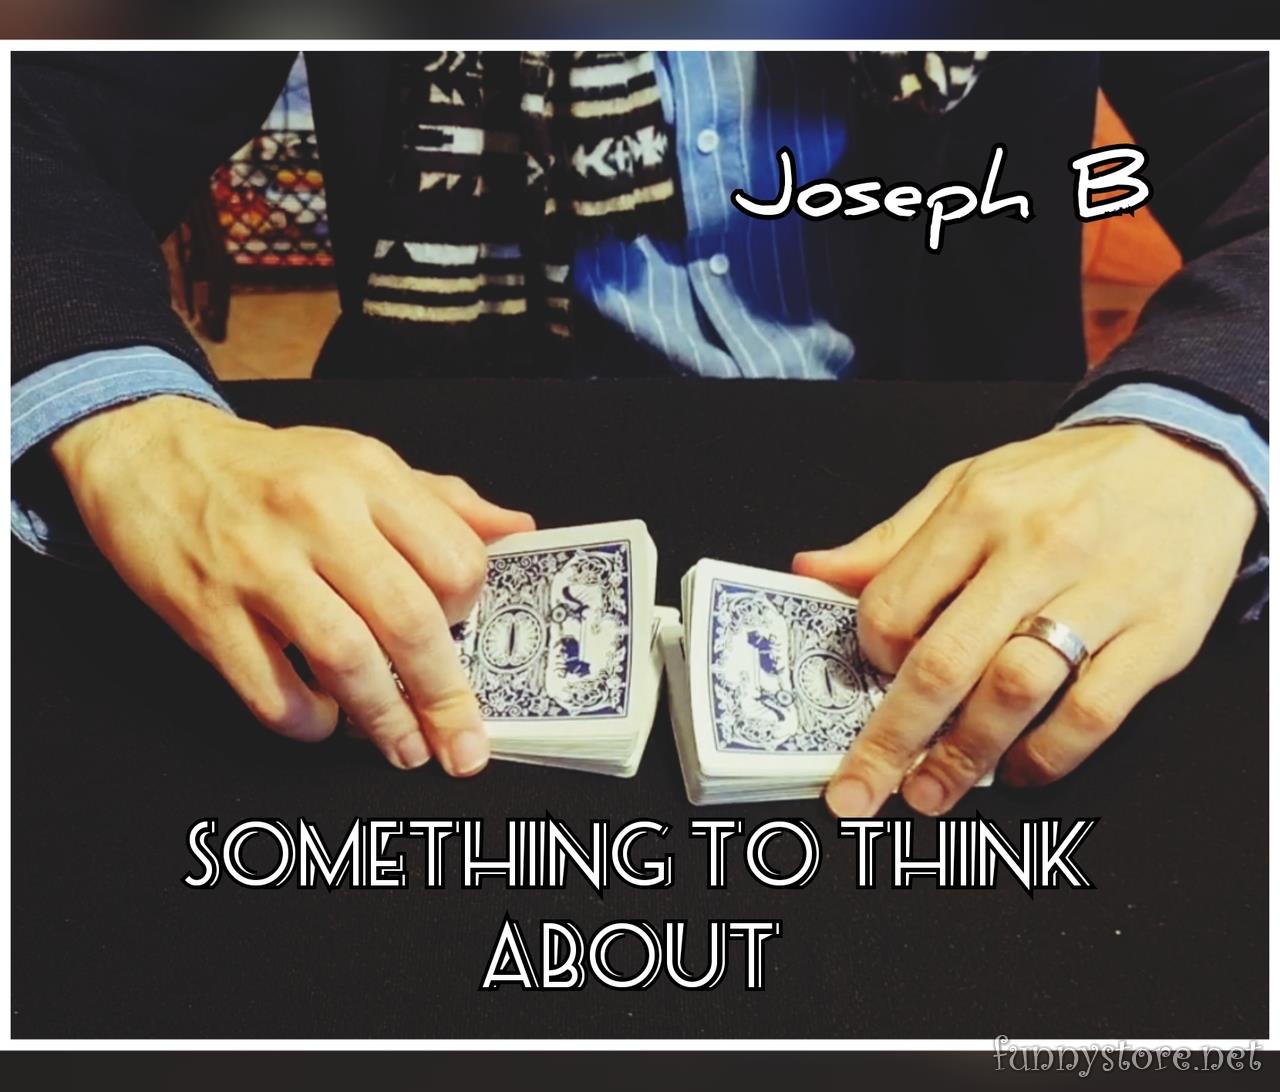 Joseph B - Something to think about